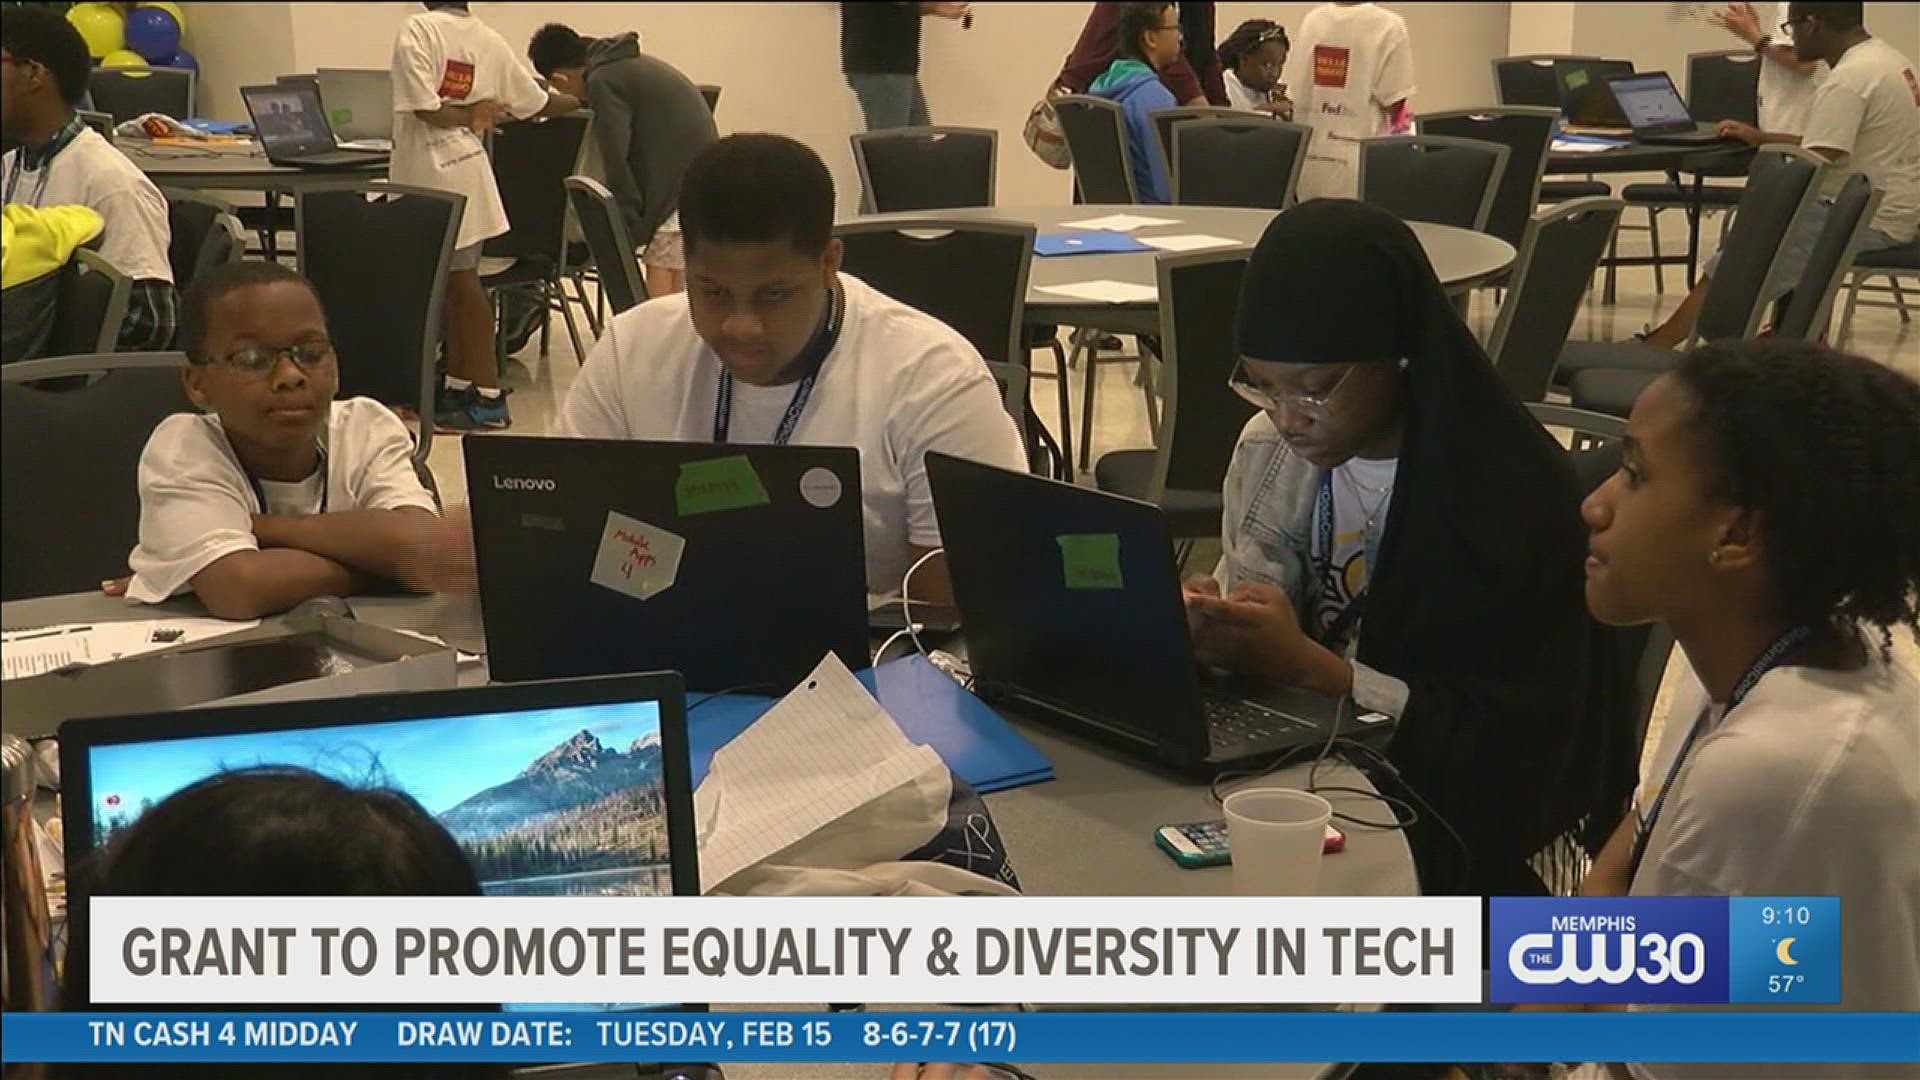 CodeCrew is one of 10 organizations in the Memphis area that received the 2022 Black Community Commitment Grant. Combined, the organizations are getting $600,000.